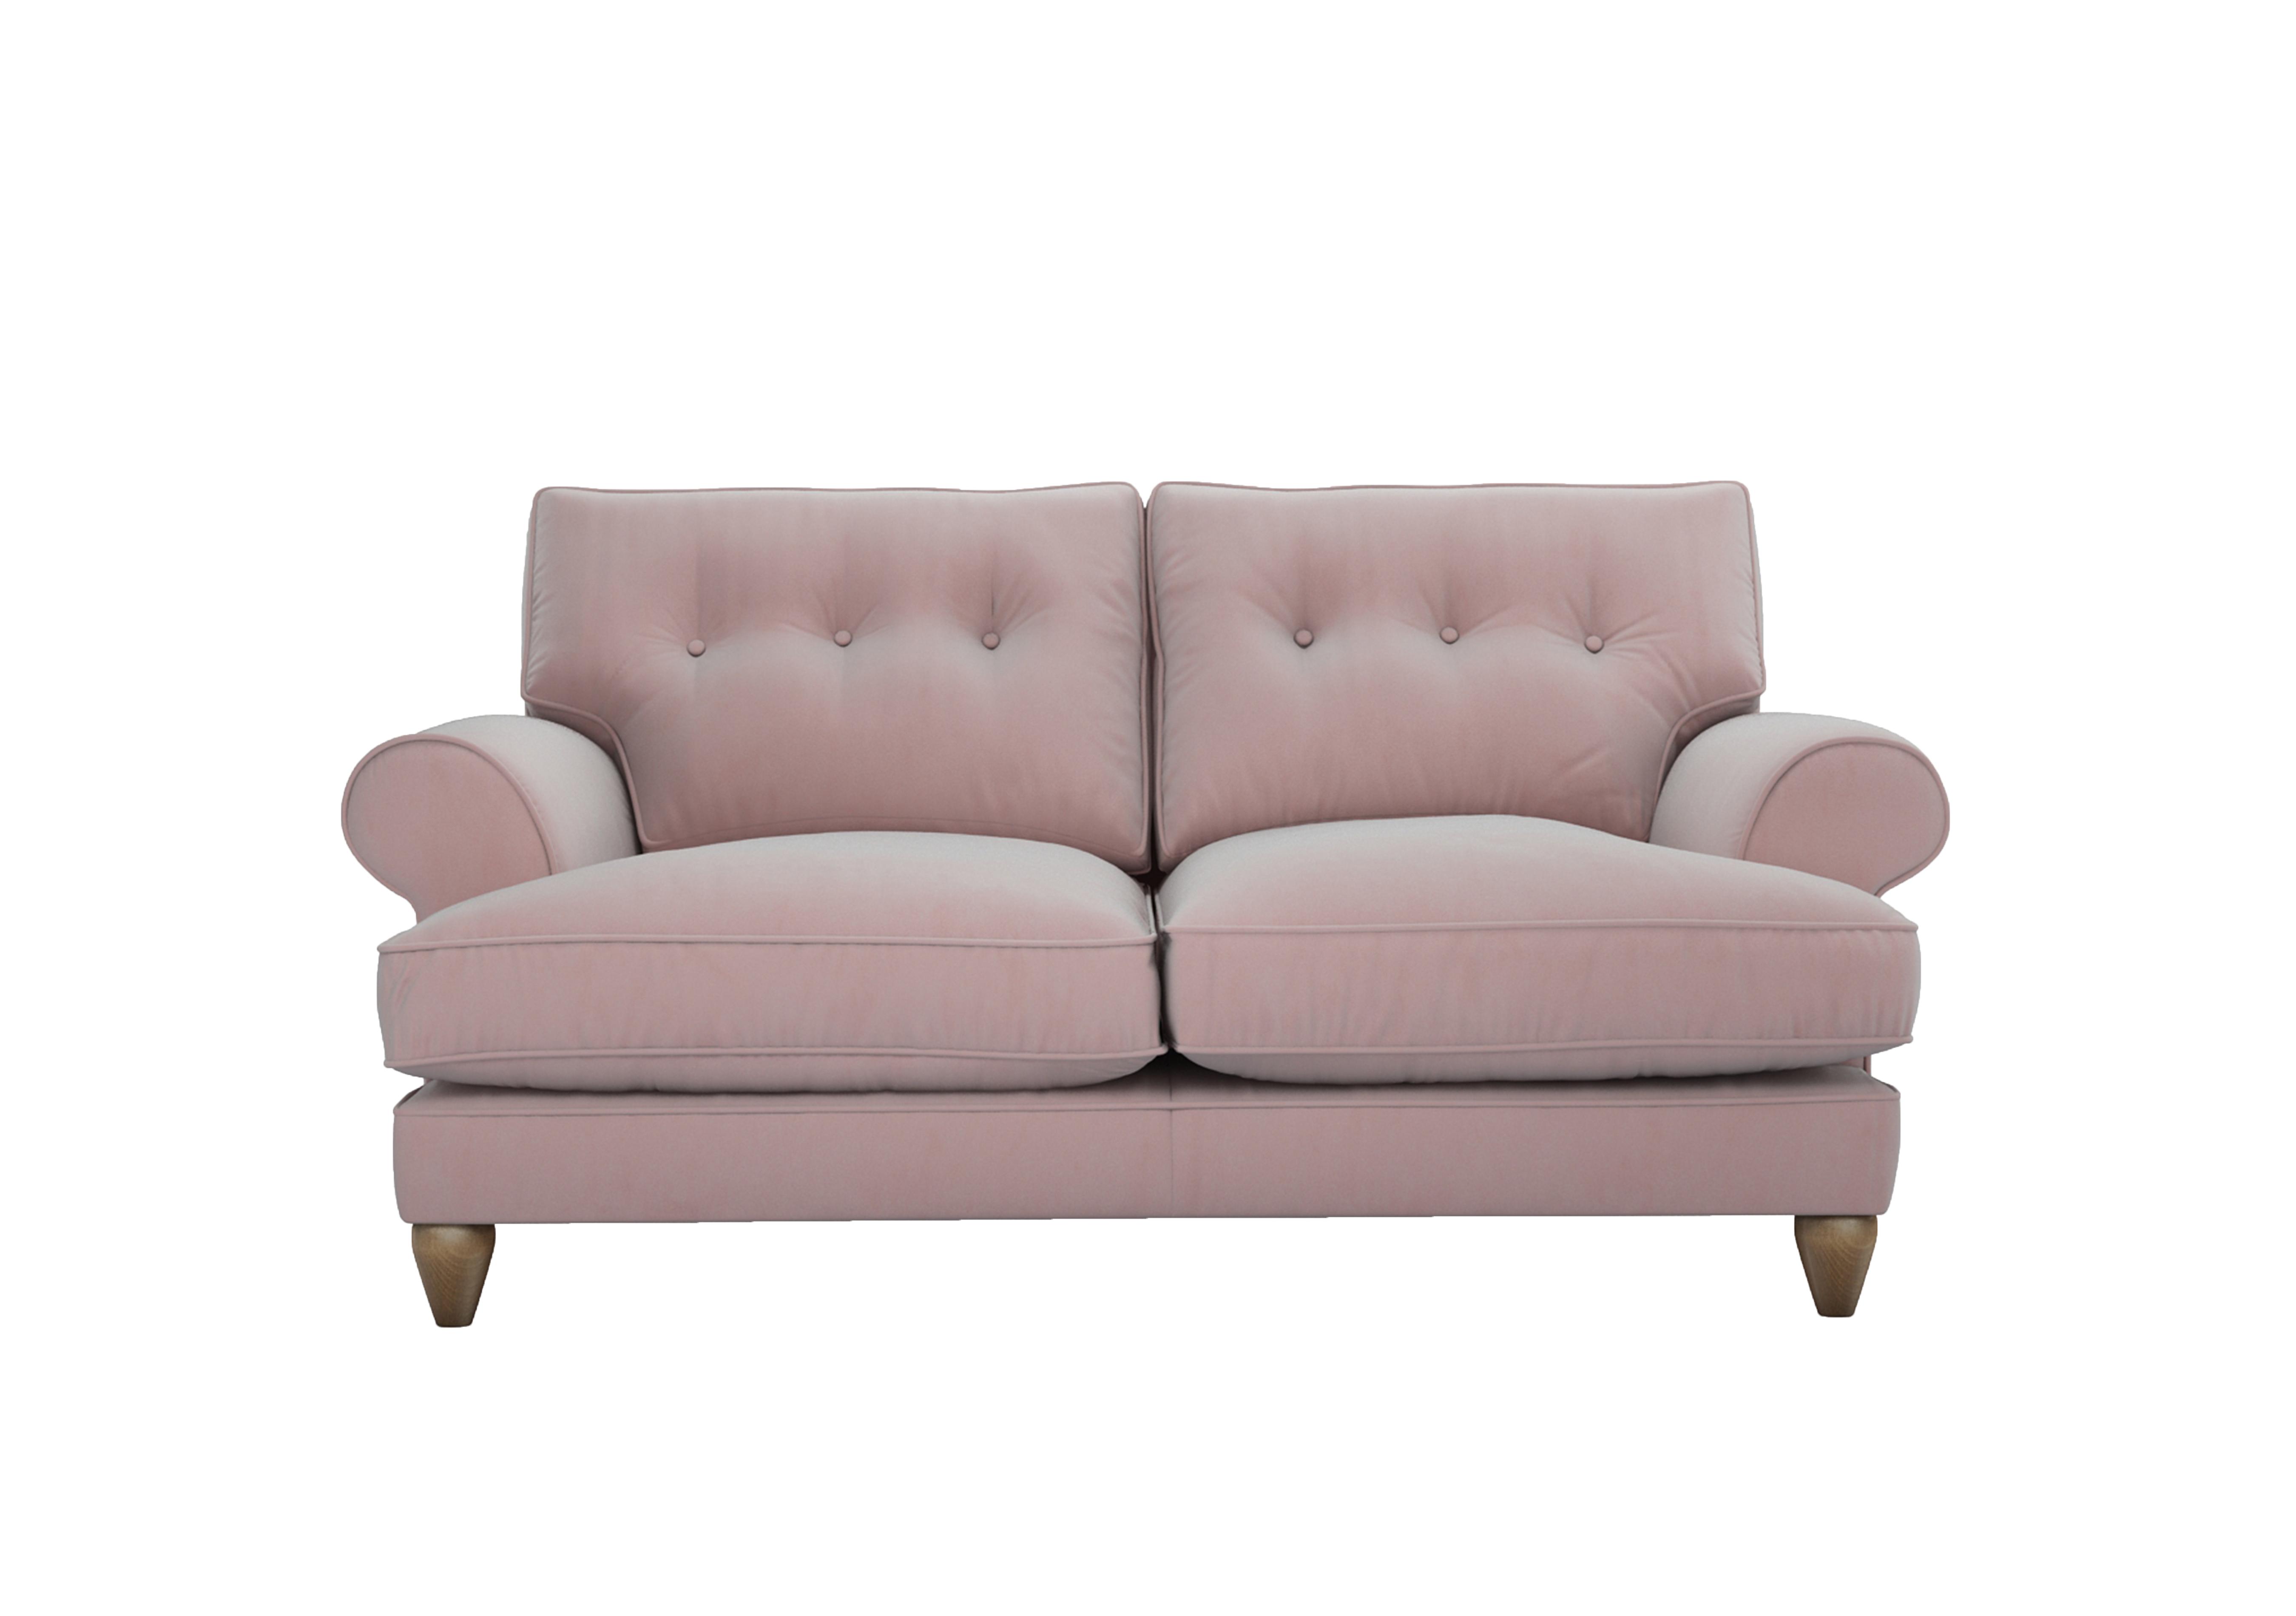 Bronwyn 2.5 Seater Fabric Classic Back Sofa in Cot256 Cotton Candy on Furniture Village